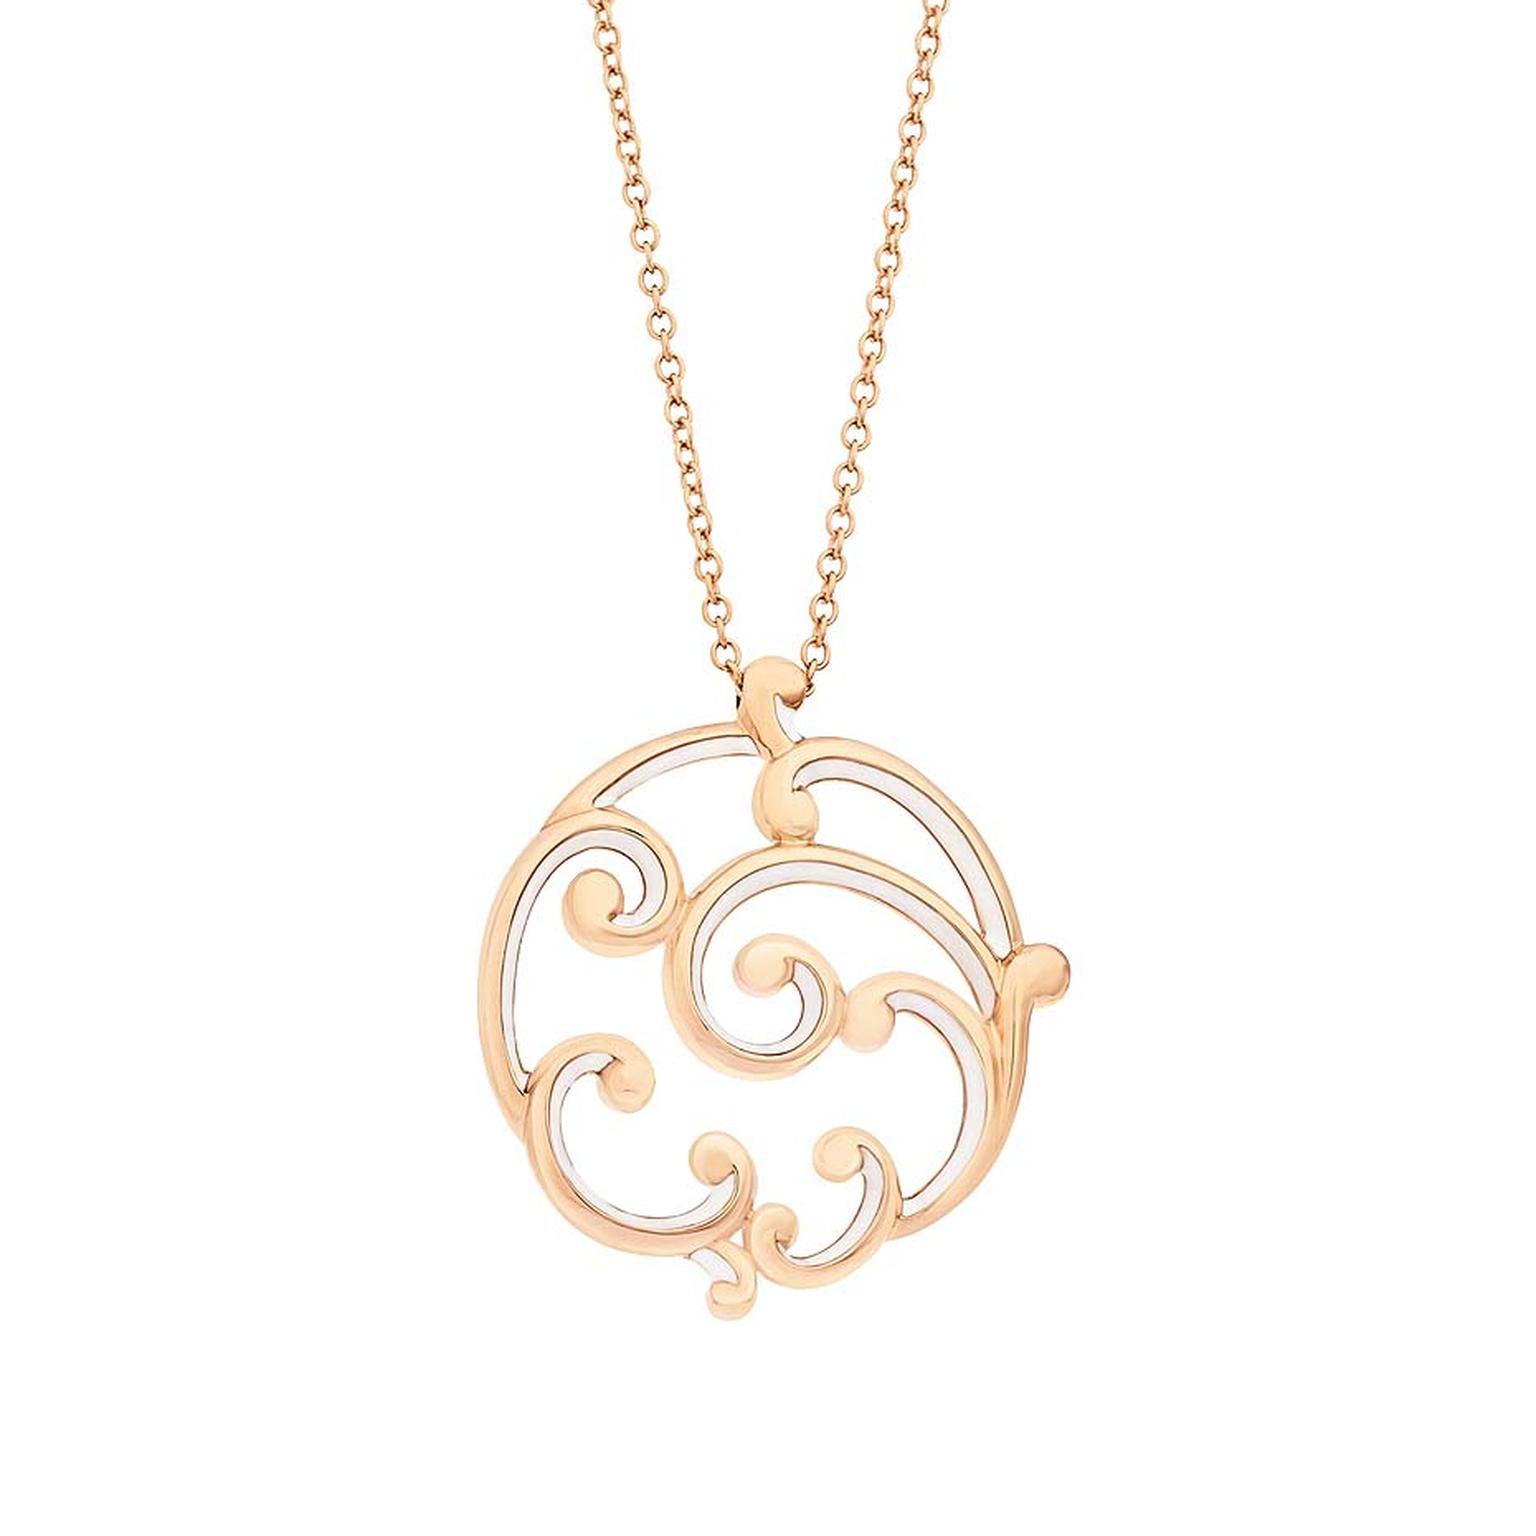 Fabergé necklace from the Rococo collection in rose gold and white enamel.